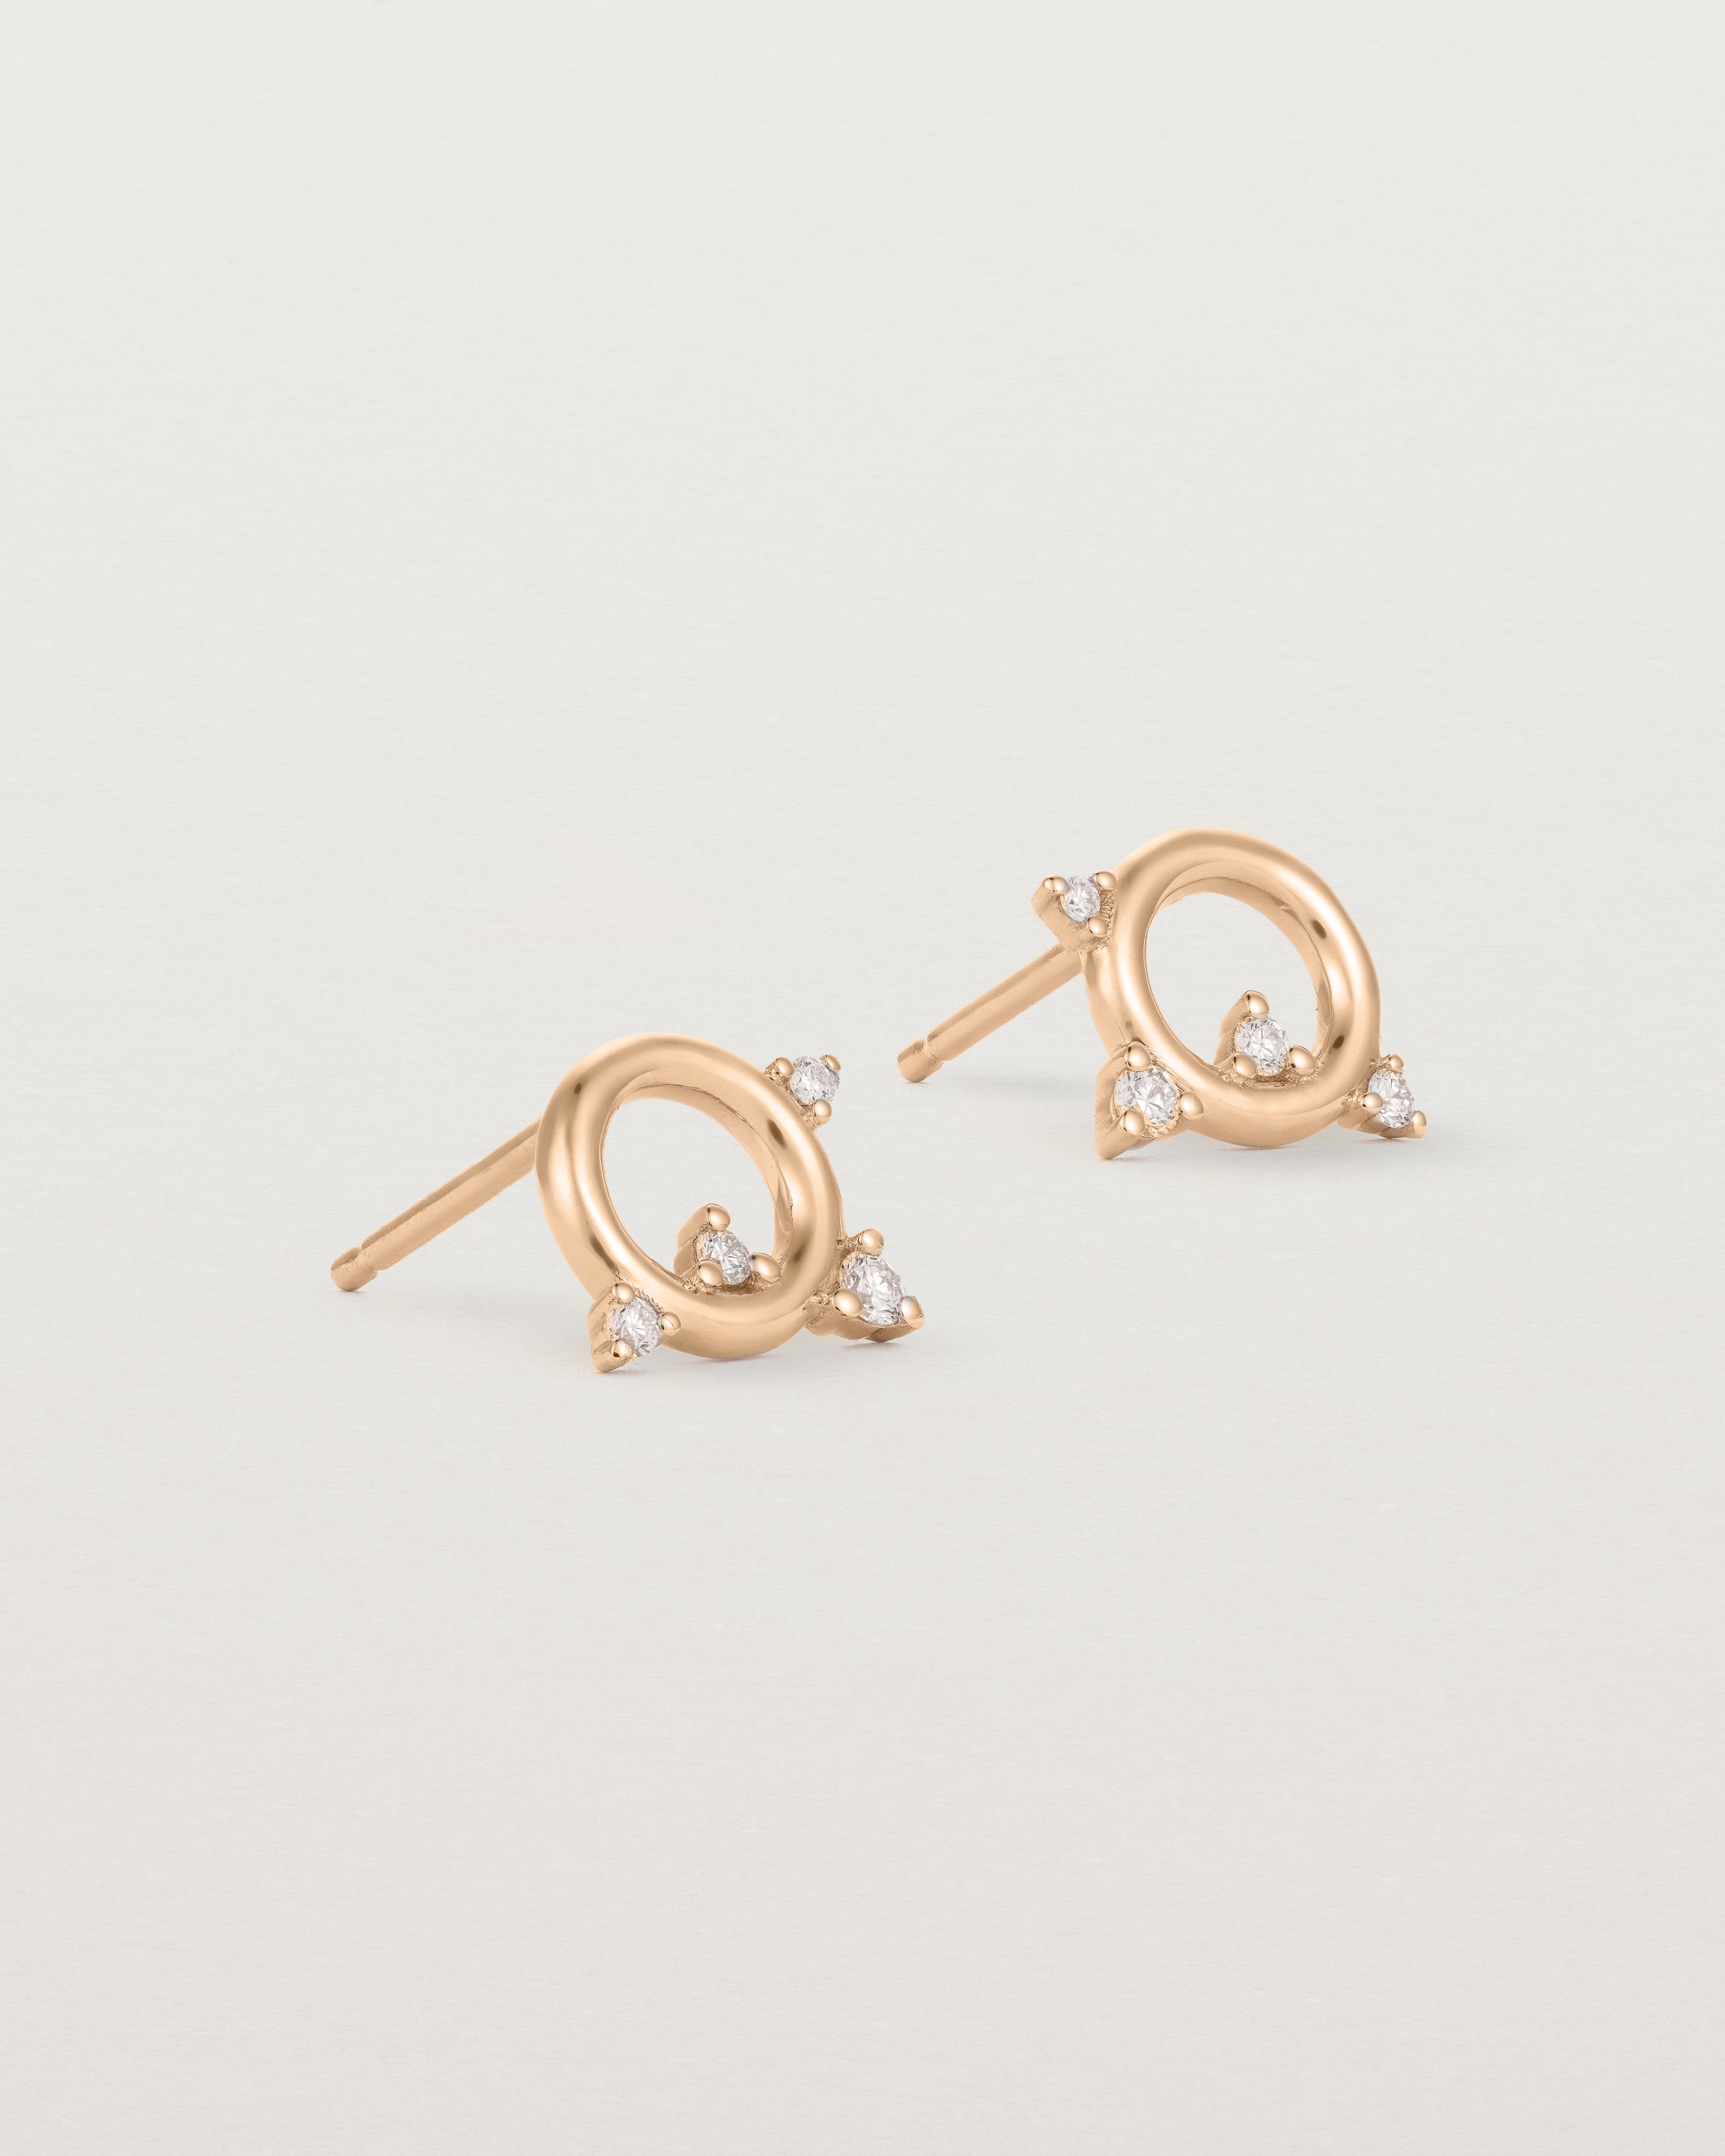 A pair of circular rose gold studs with four white diamonds